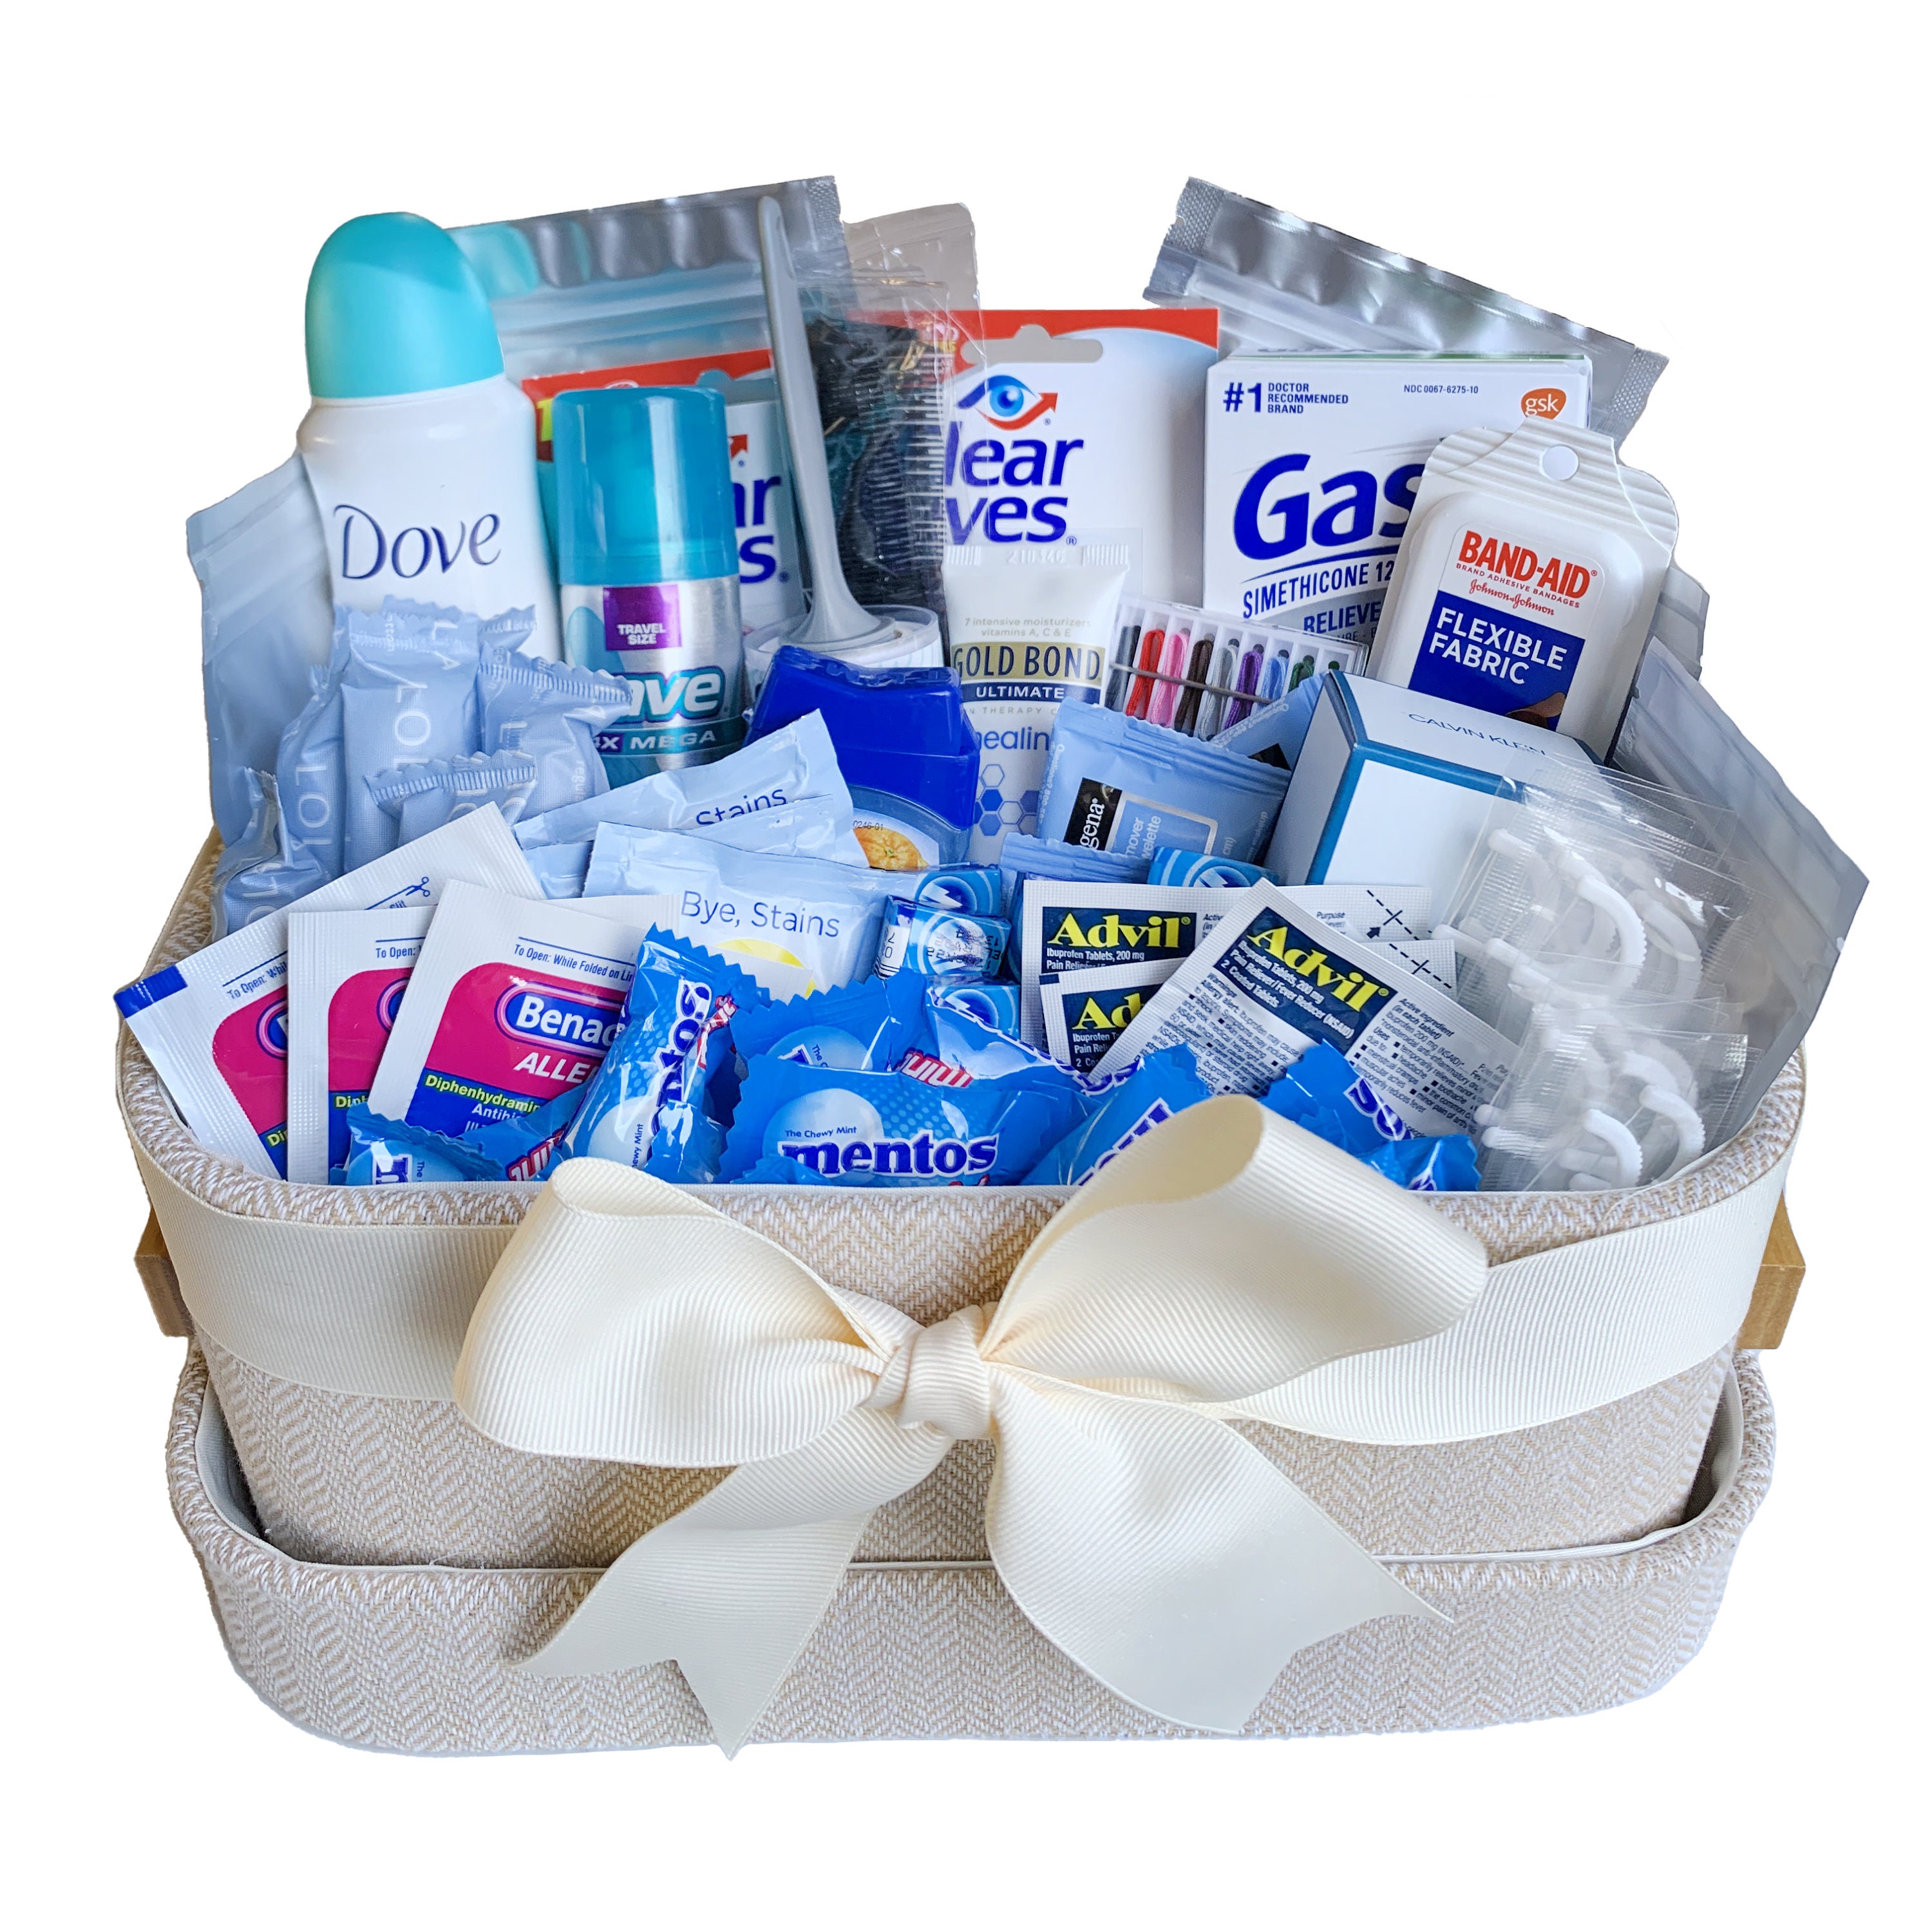  With You In Mind Inc - Restroom Amenity Basket - Women - more  than 50 guests : Industrial & Scientific